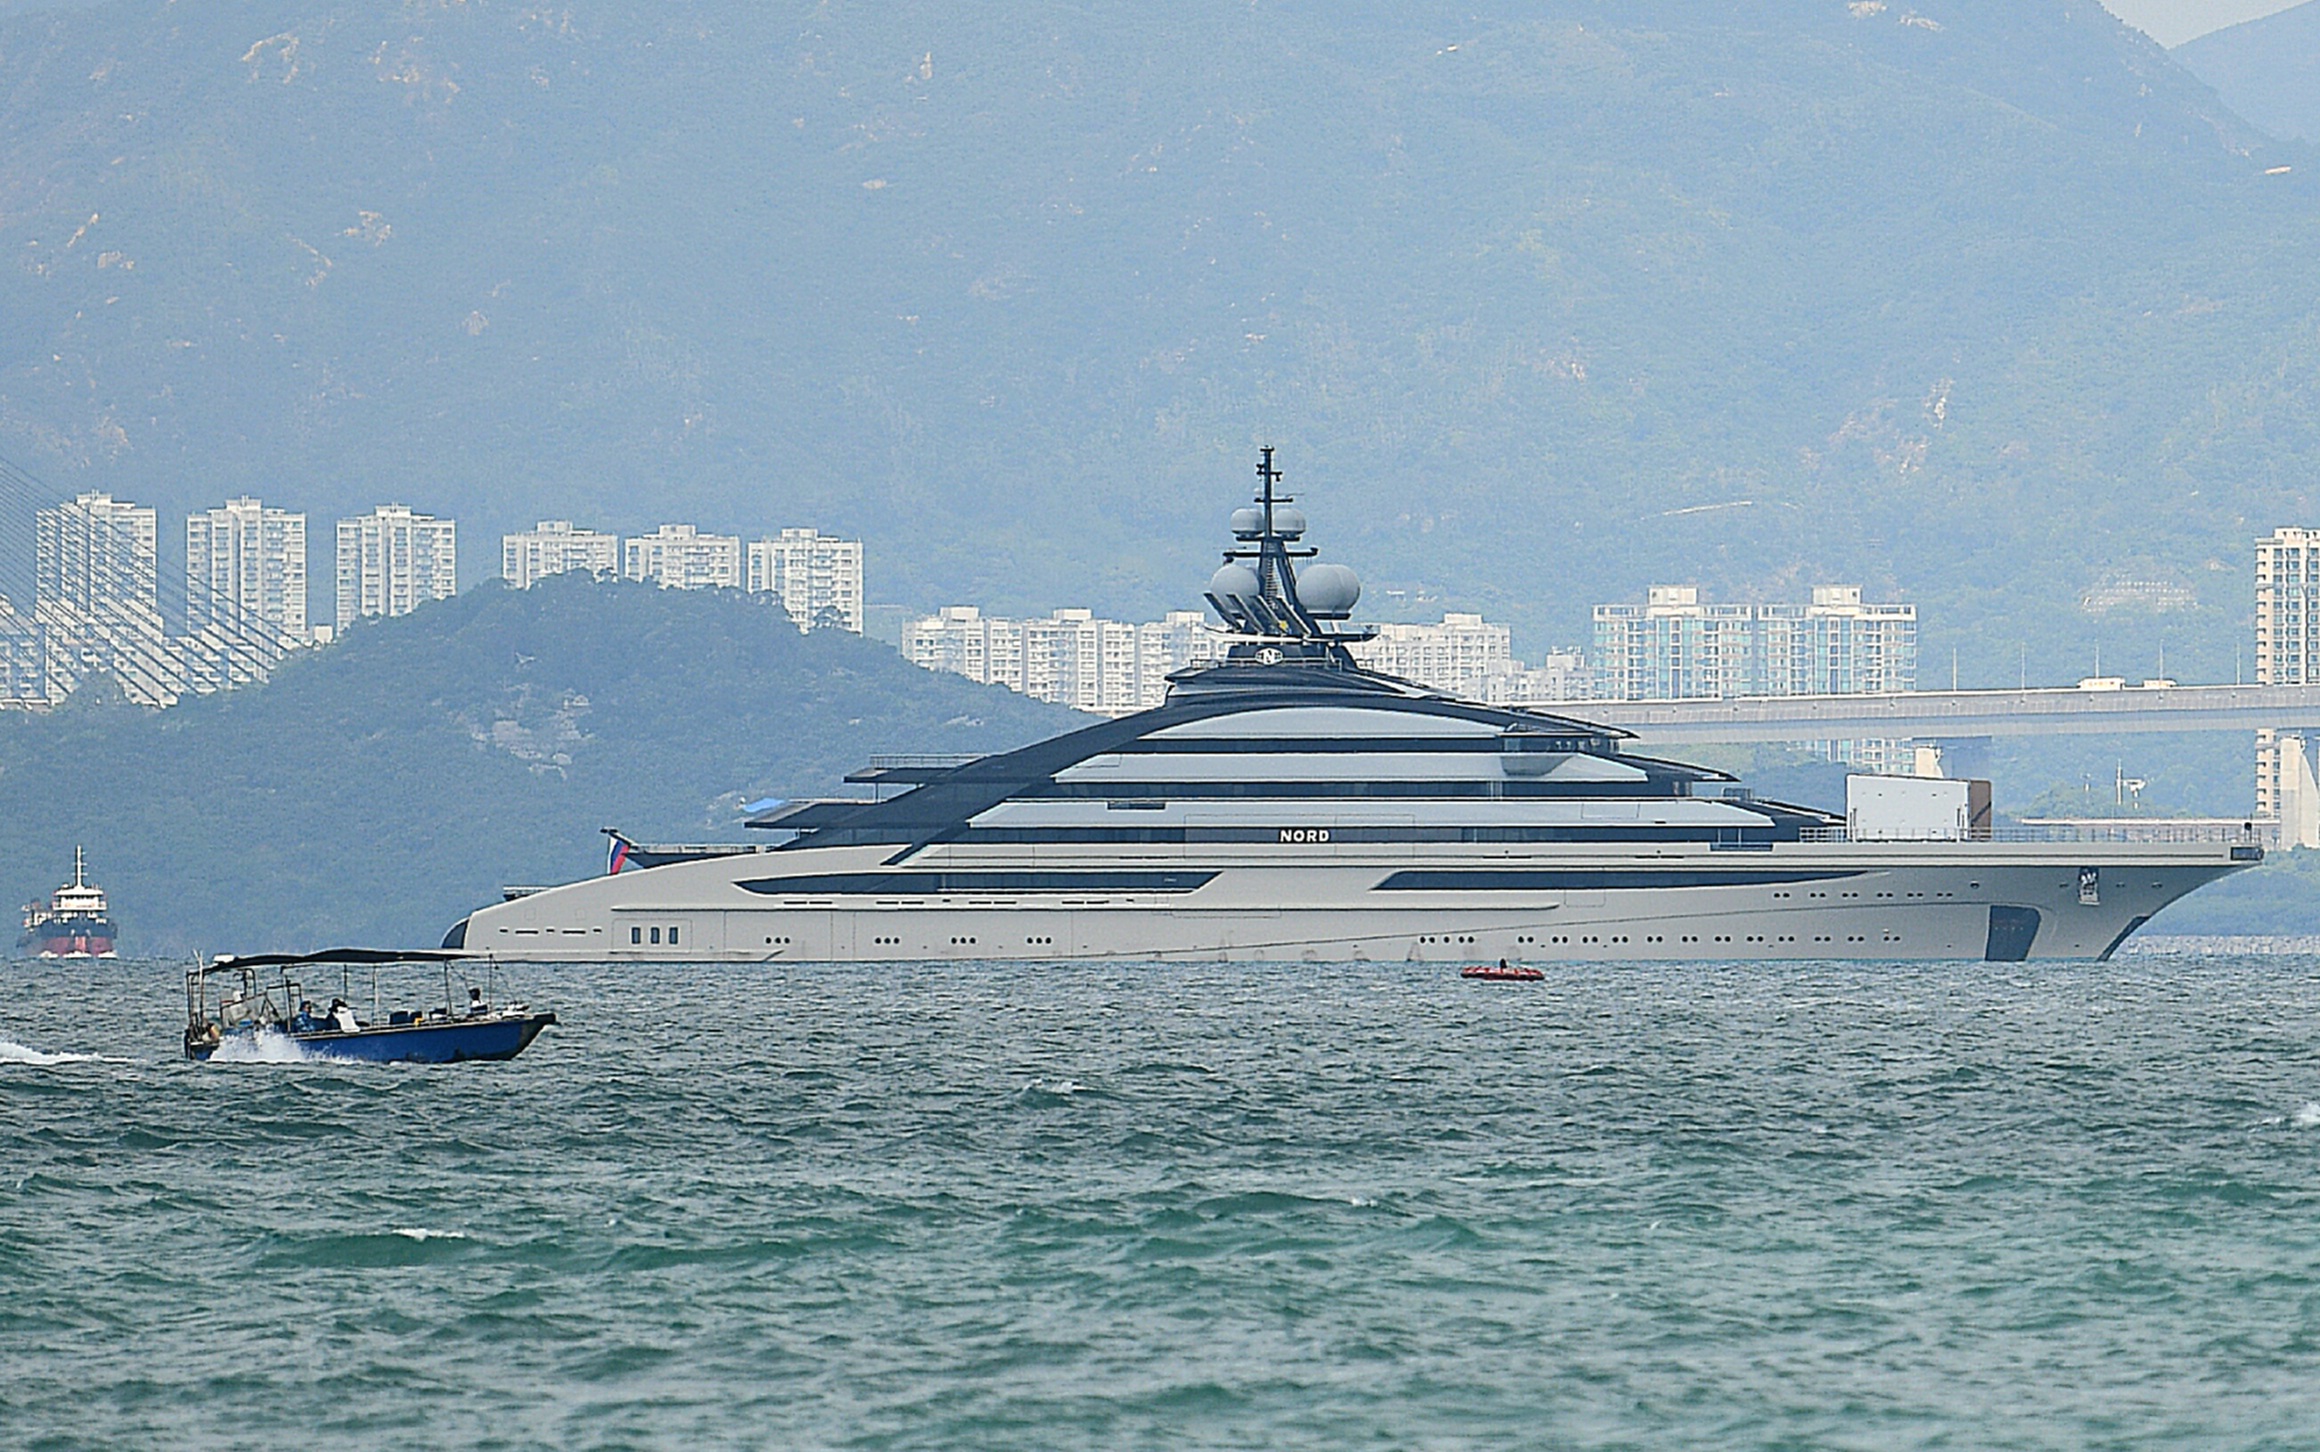 Sanctioned Russian tycoon Mordashov's superyacht Nord found moored on Hong Kong waters on Oct. 5, 2022. (Big Mack/The Epoch Times)